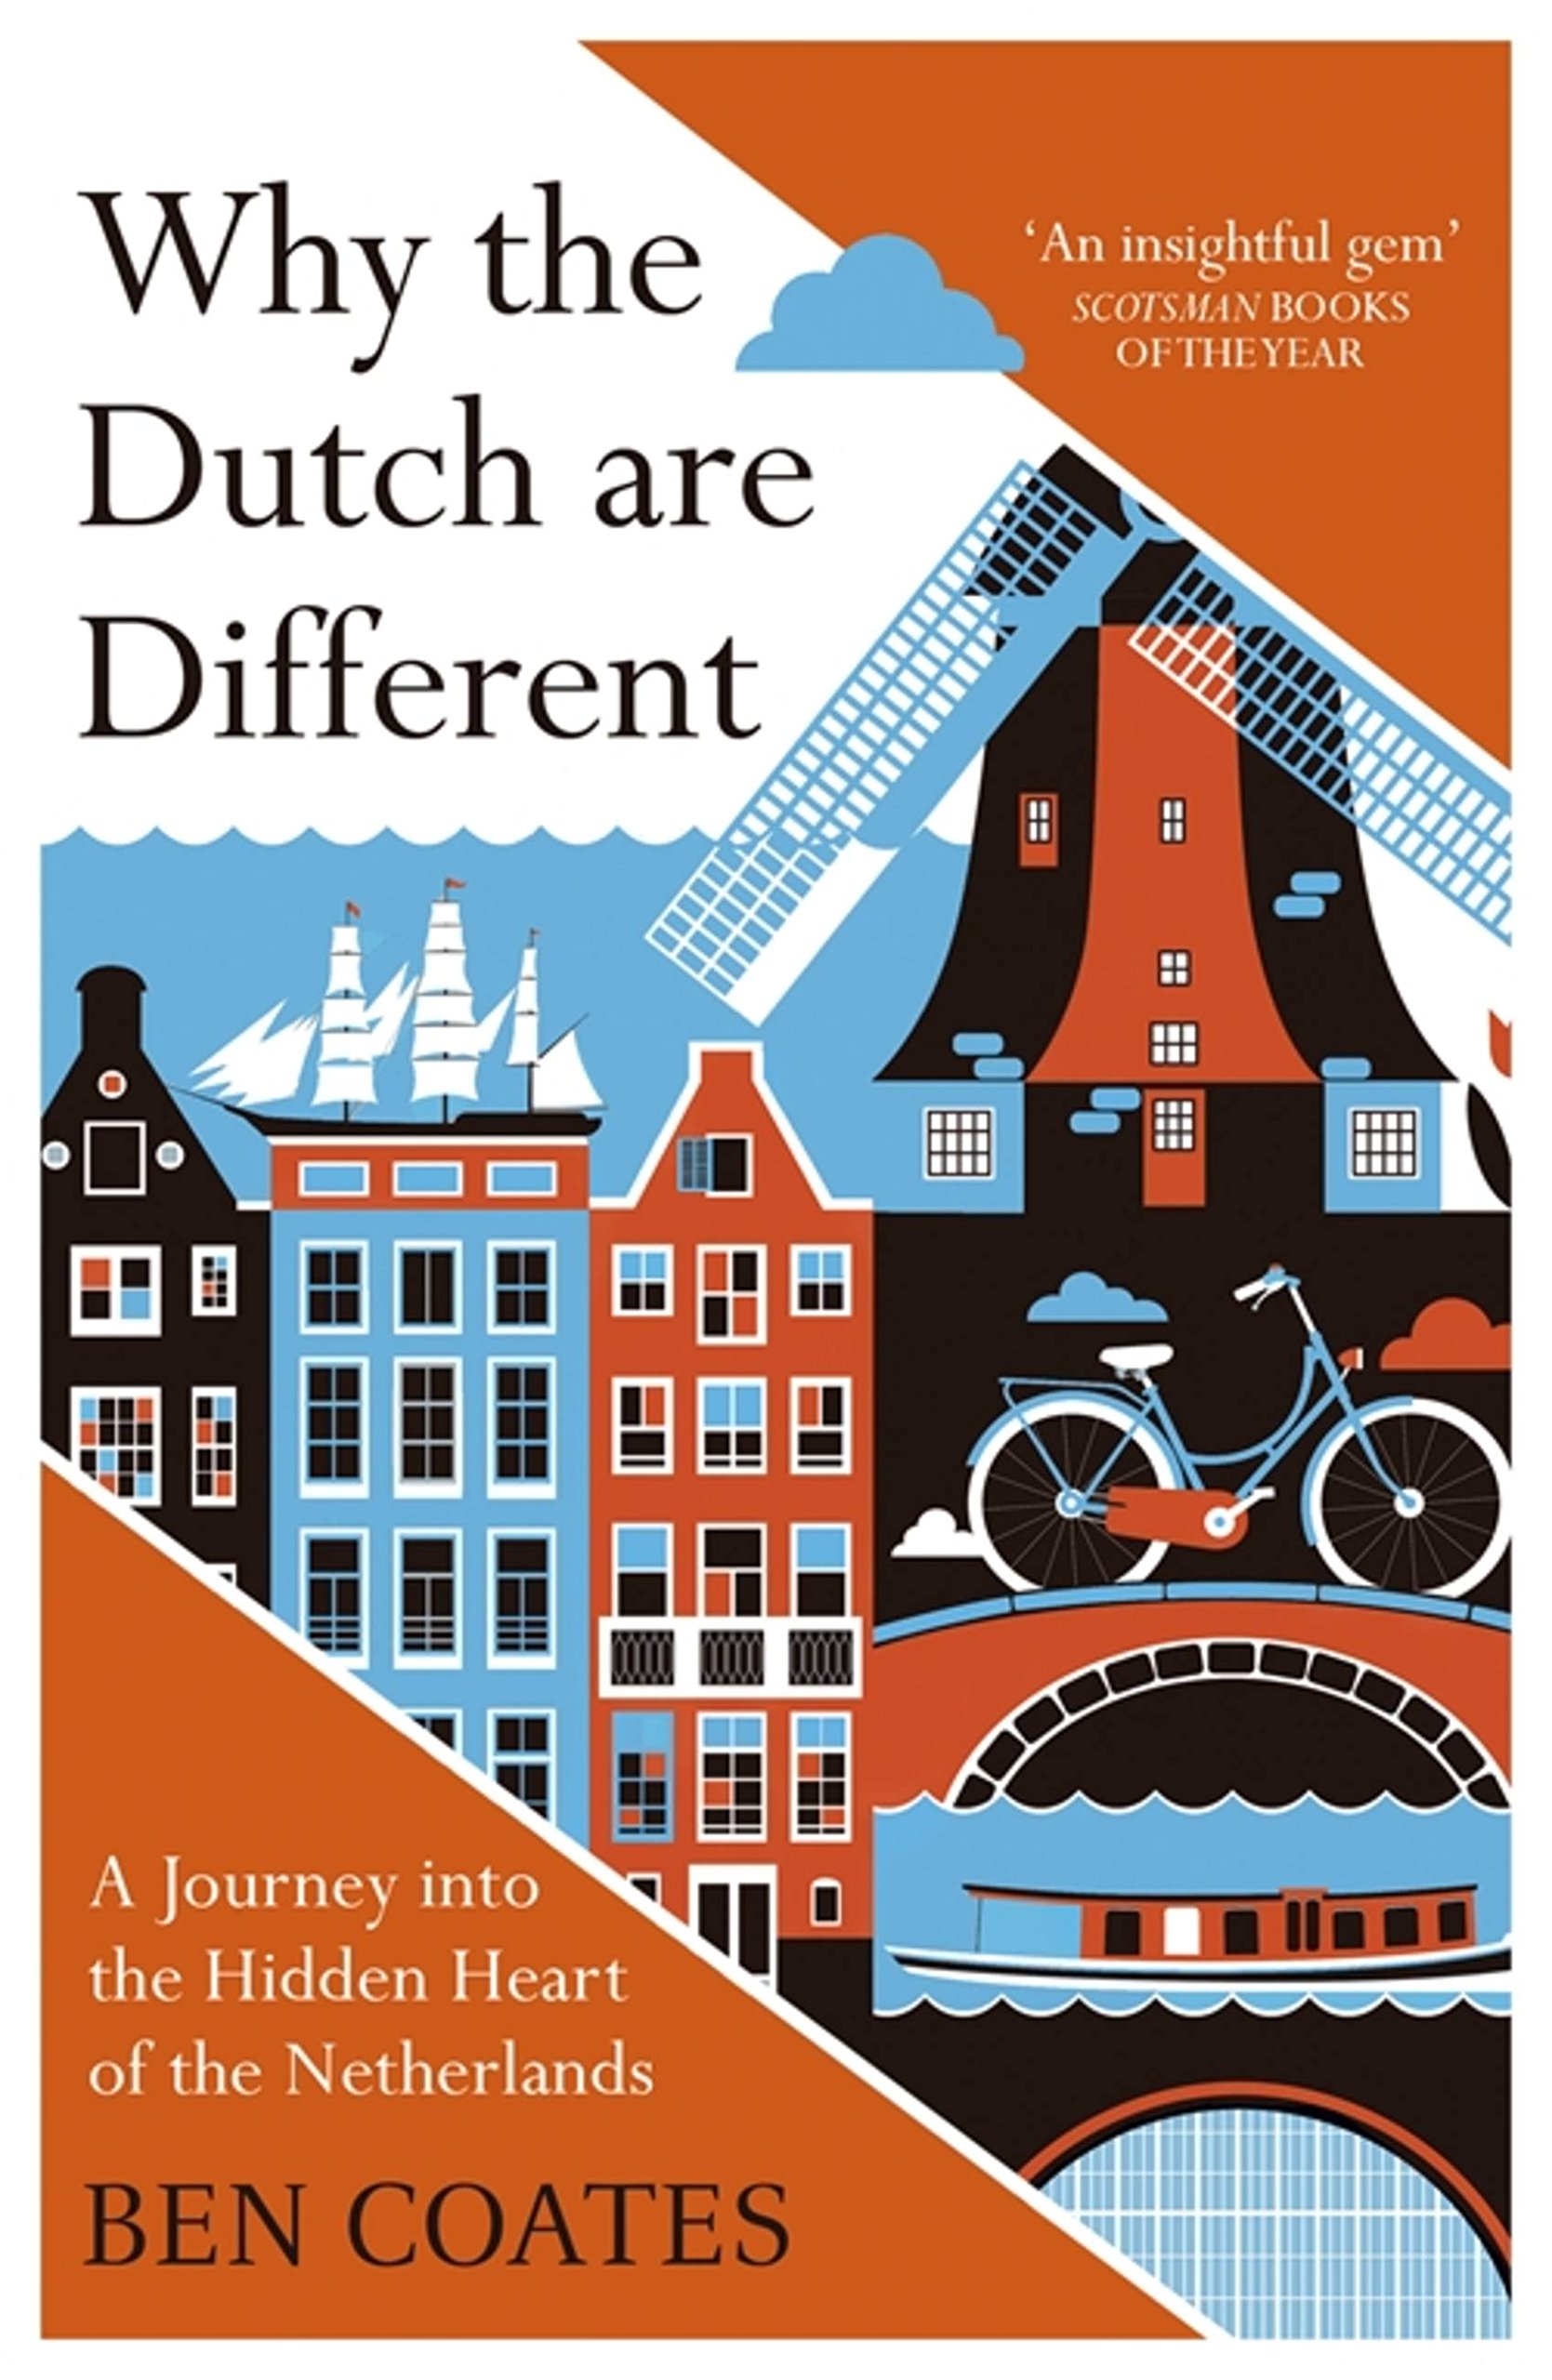 Why the Dutch are Different: A Journey into the Hidden Heart of the Netherlands (eBook) by Ben Coates $0.99